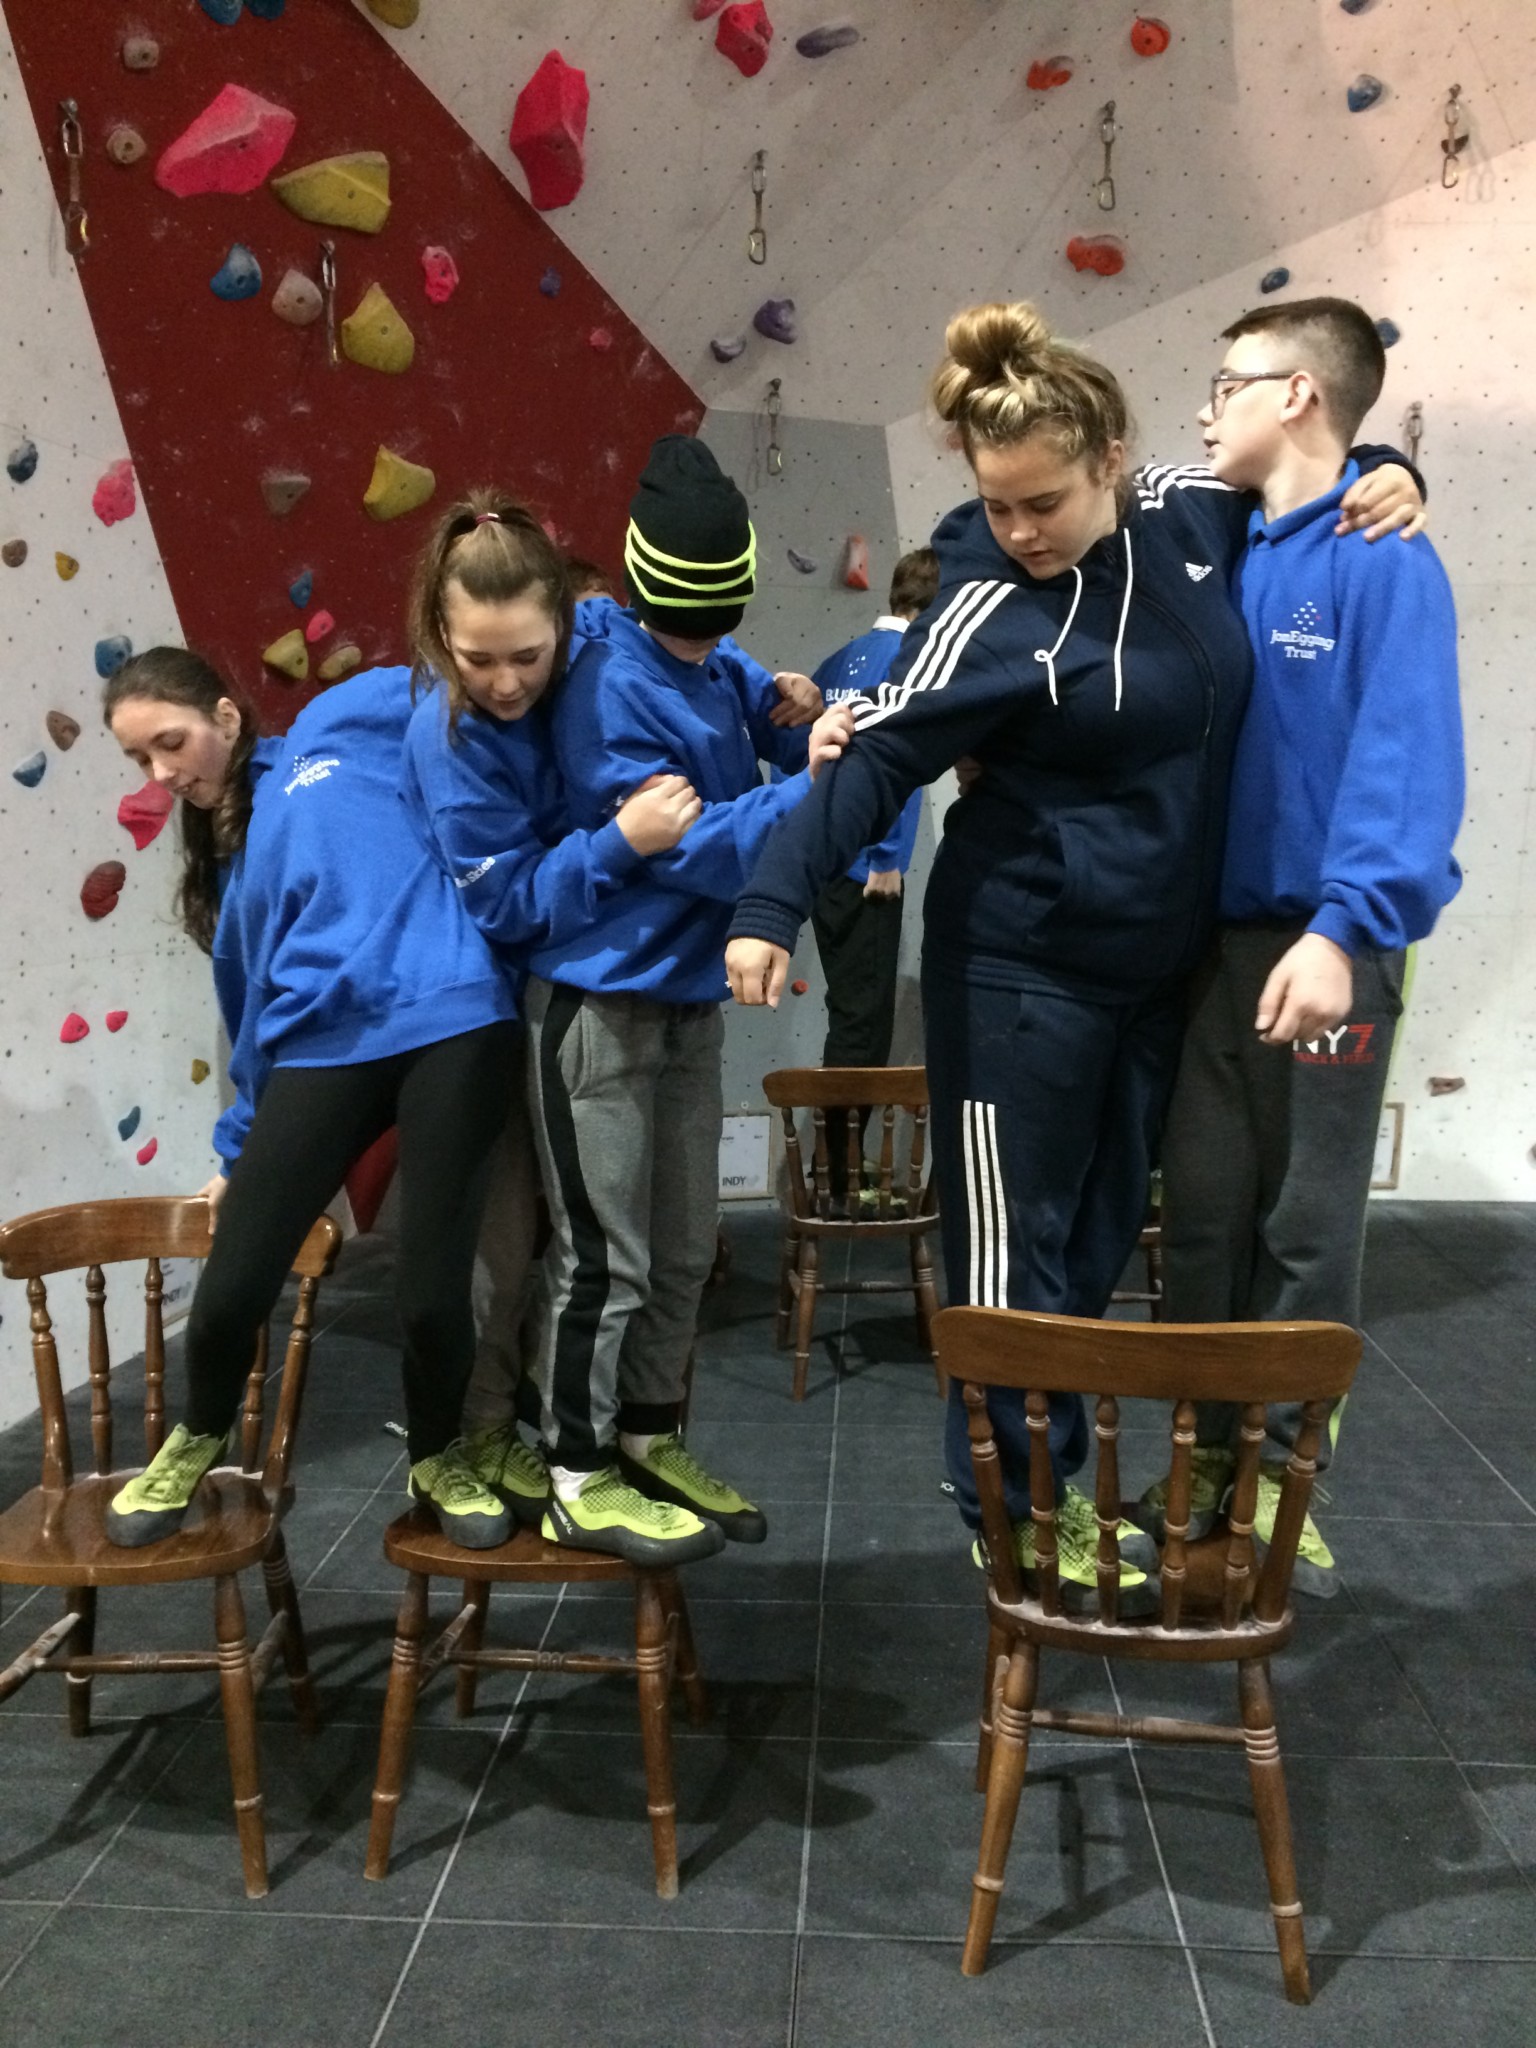 Level 2 students' confidence rises on the climbing wall